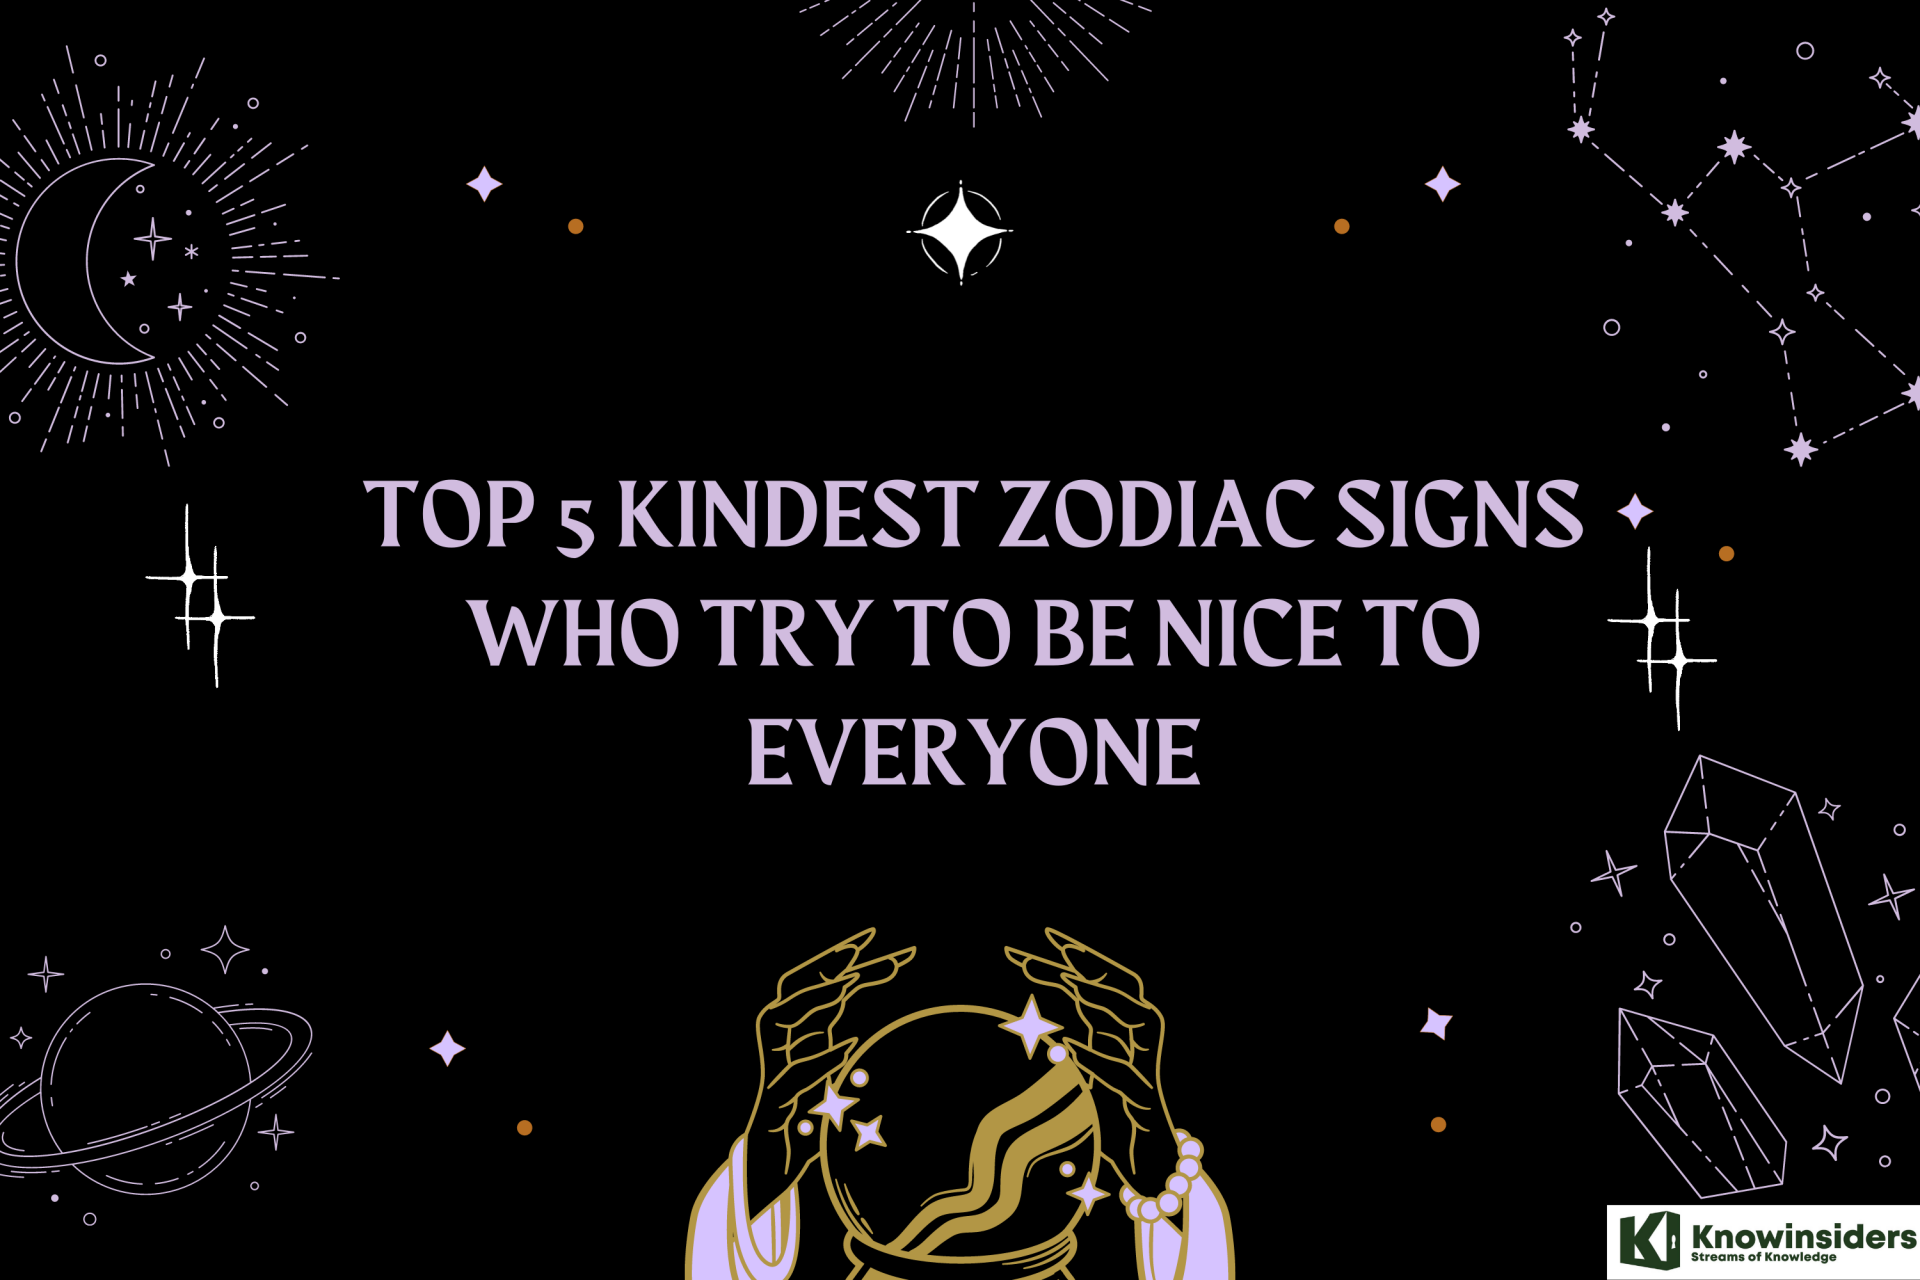 Top 5 Kindest Zodiac Signs Who Try To Be Nice To Everyone